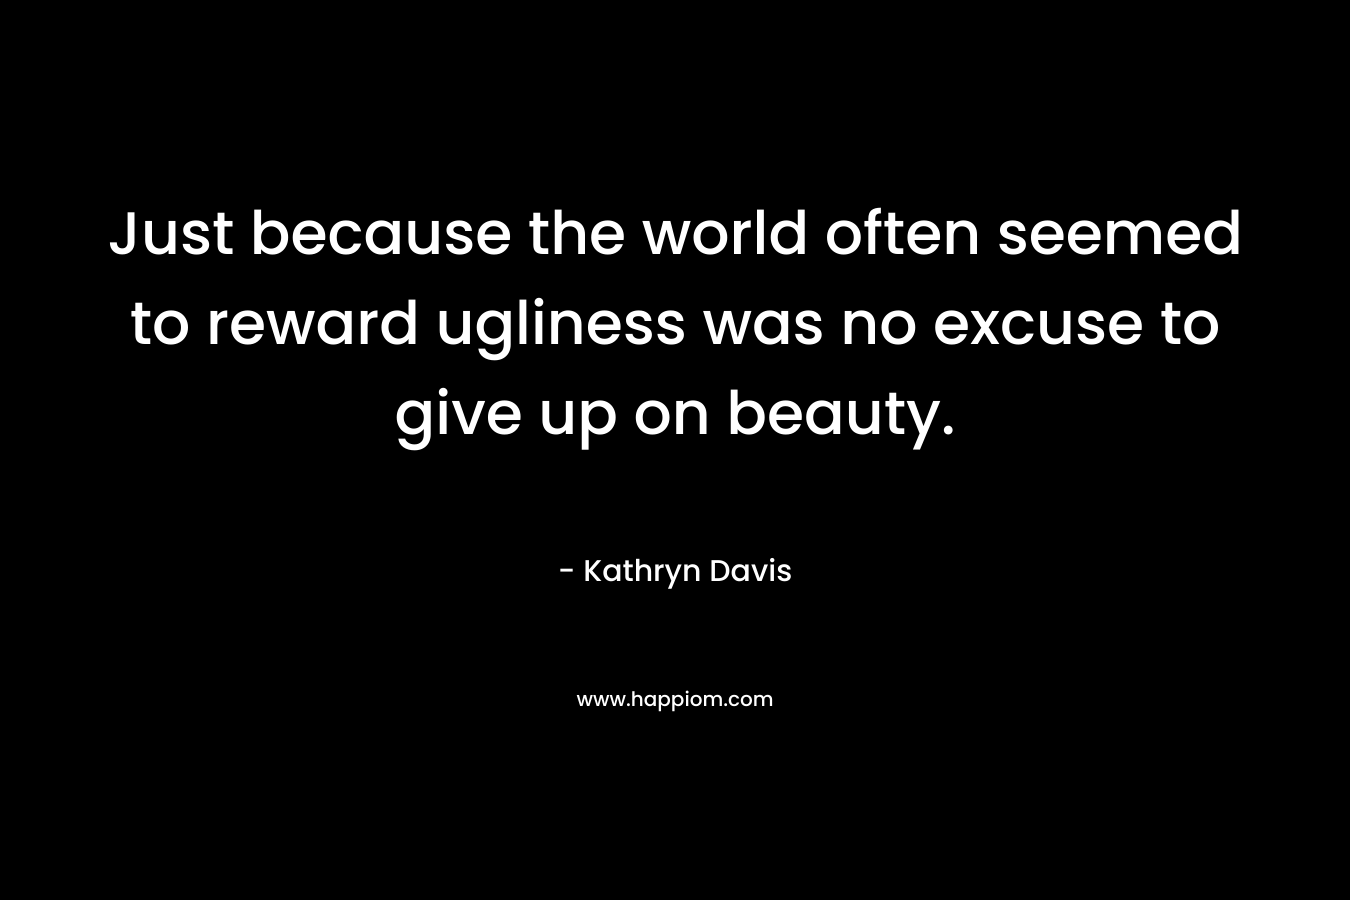 Just because the world often seemed to reward ugliness was no excuse to give up on beauty. – Kathryn Davis